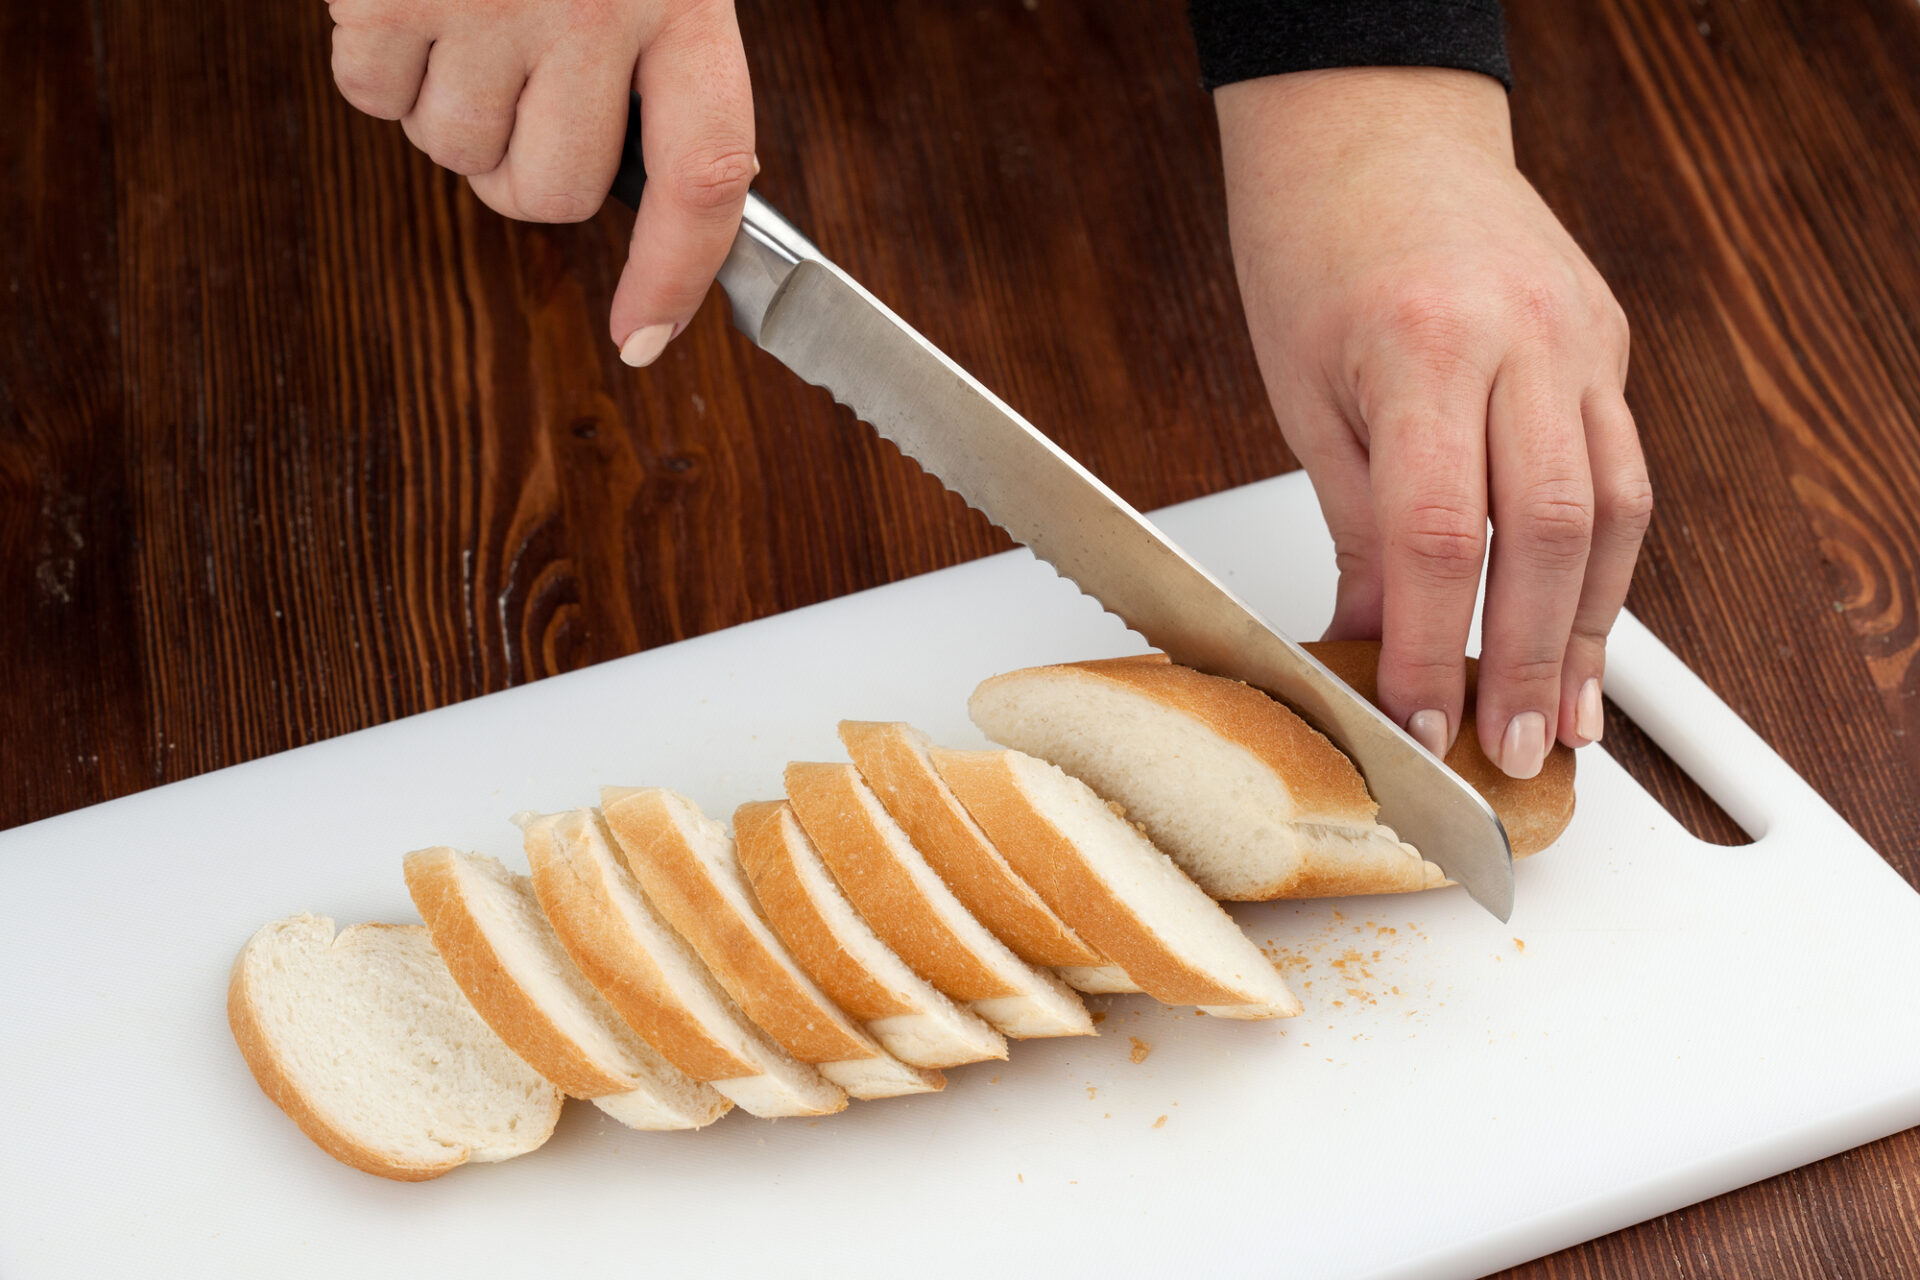 Cutting a baguette into slices.